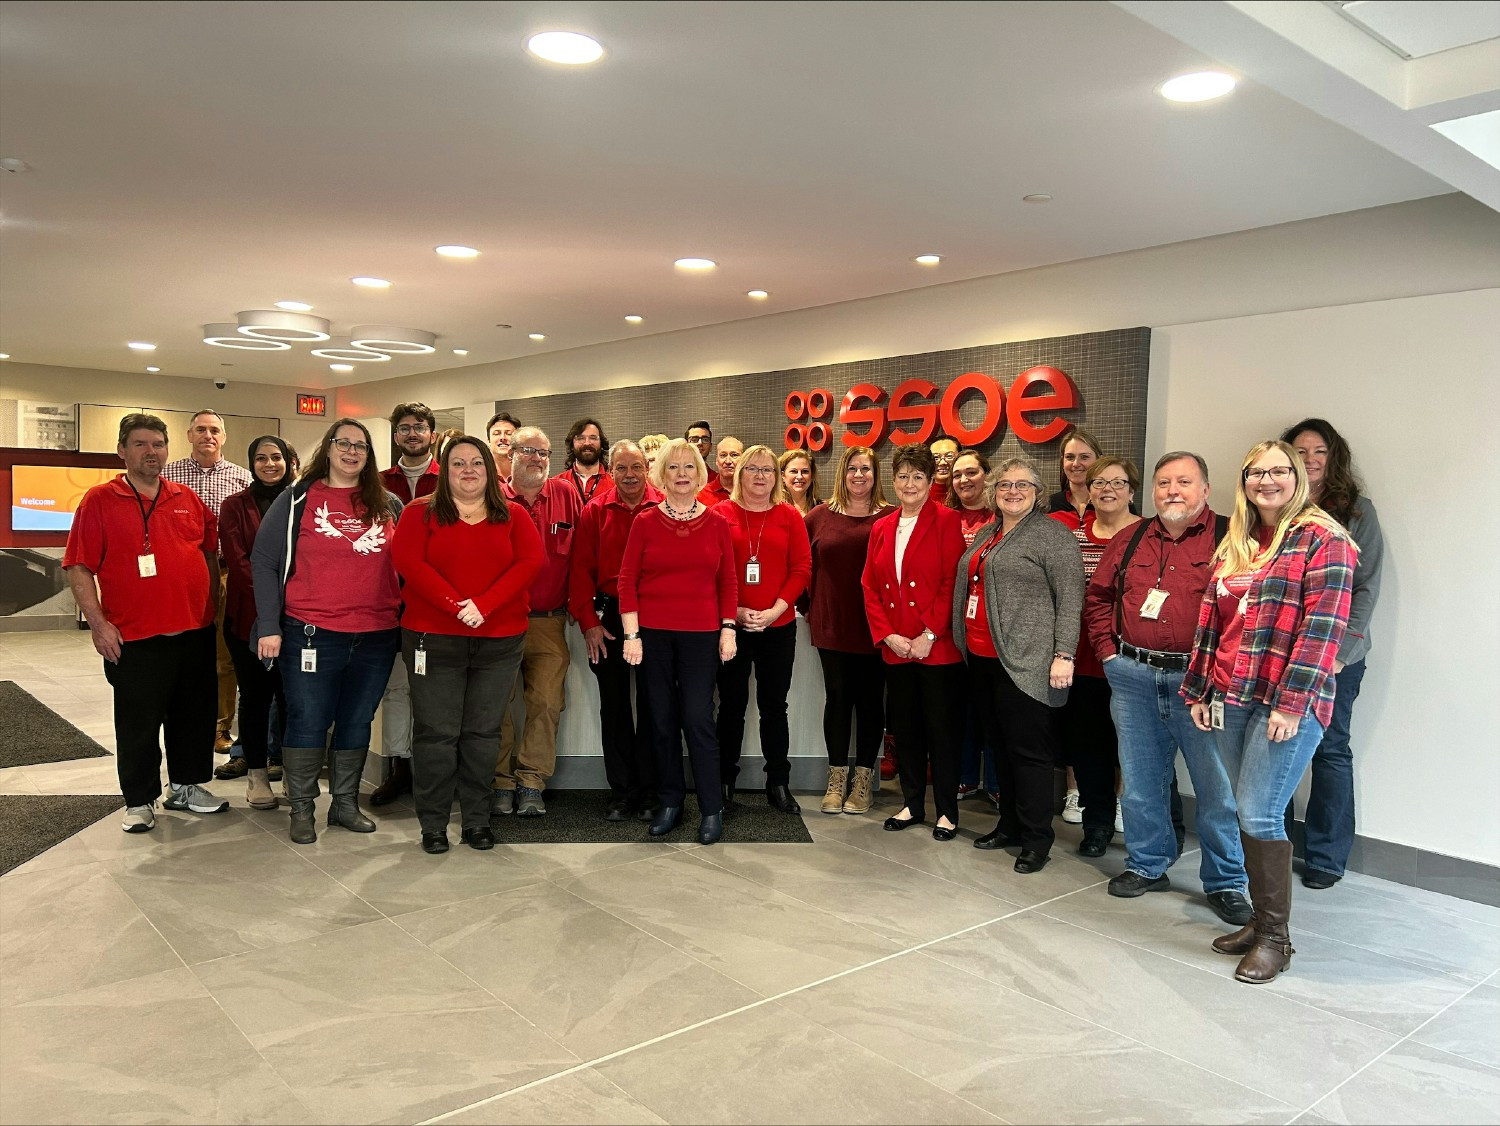 In February, some of our Toledo employees wore red to raise awareness of the No. 1 killer, heart disease.  